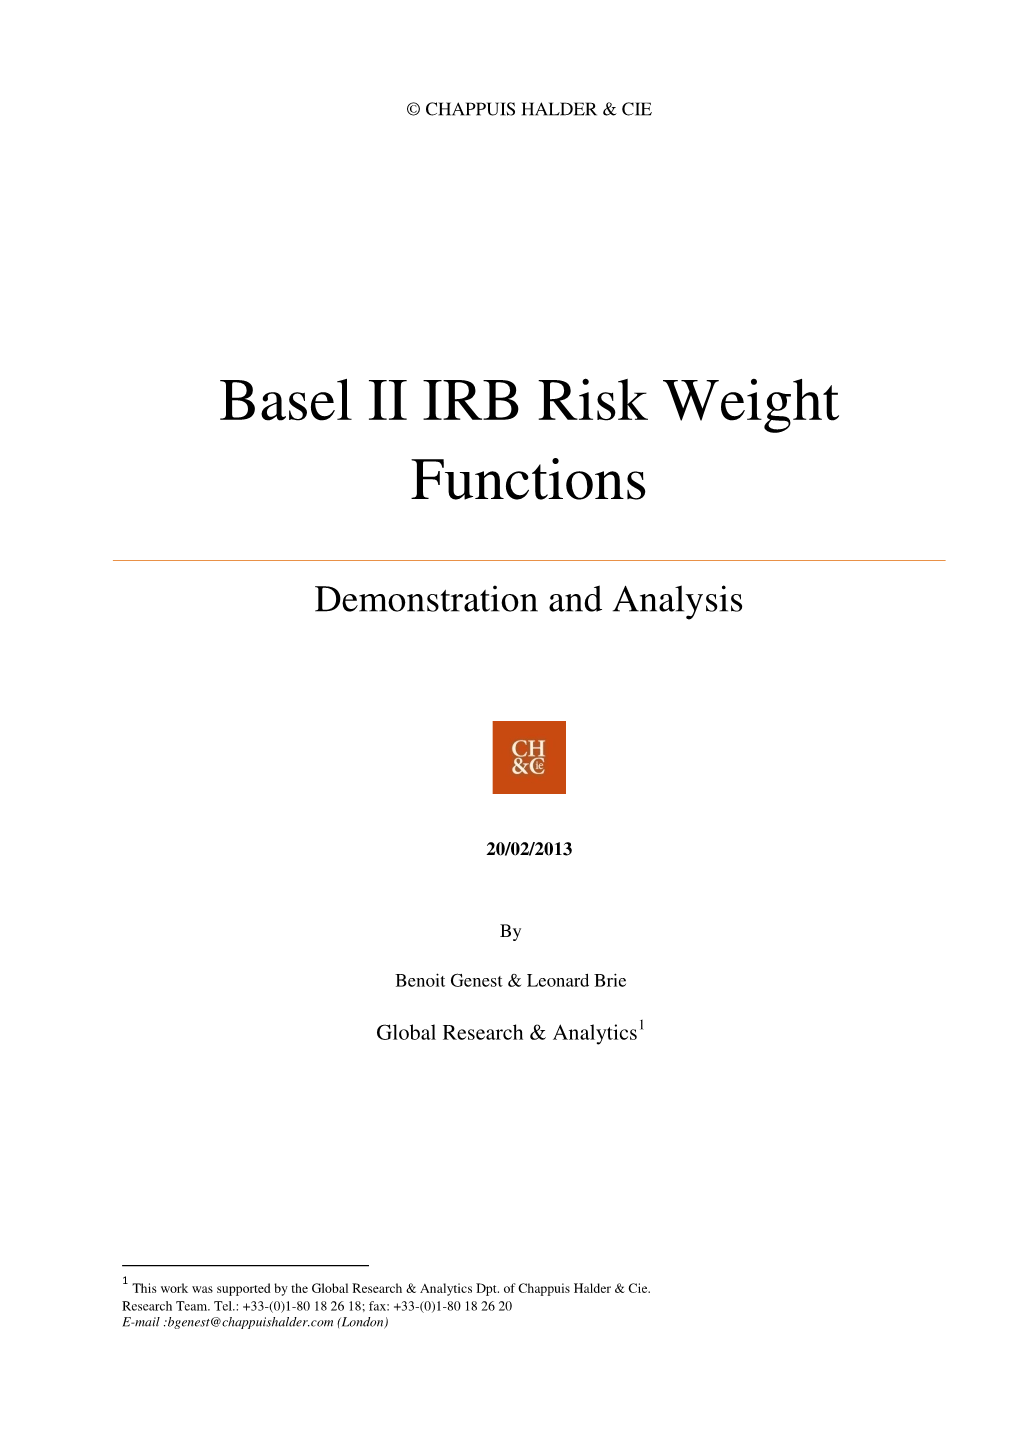 Basel II IRB Risk Weight Functions